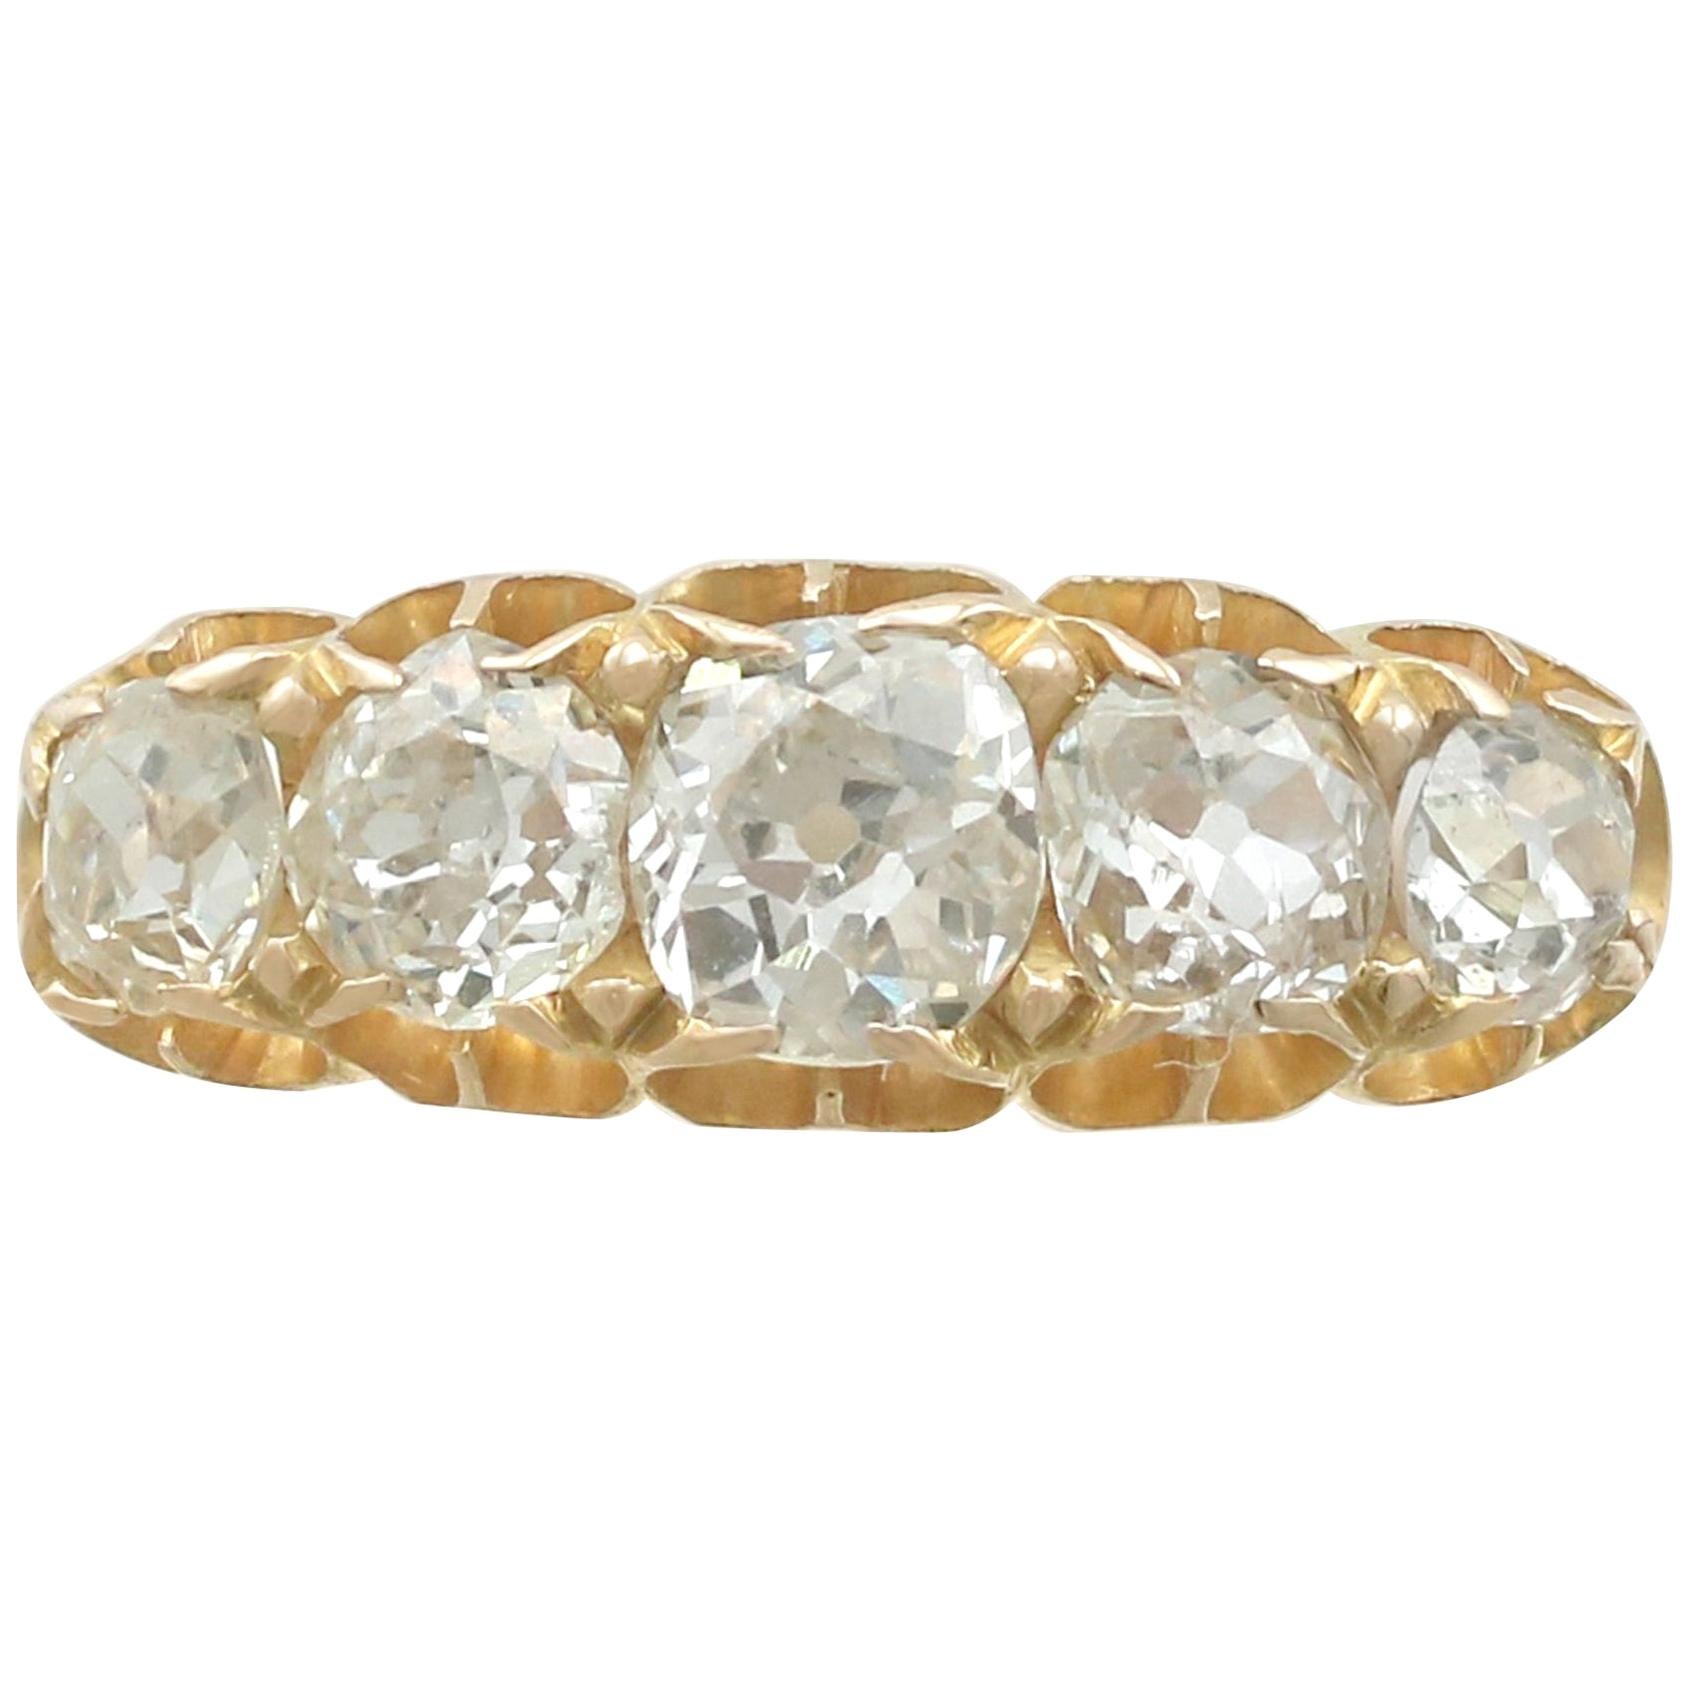 An impressive antique Victorian 1.51 carat diamond and 18 karat yellow gold five stone dress ring; part of our diverse antique jewellery and estate jewelry collections.

This stunning, fine and impressive five stone diamond ring has been crafted in